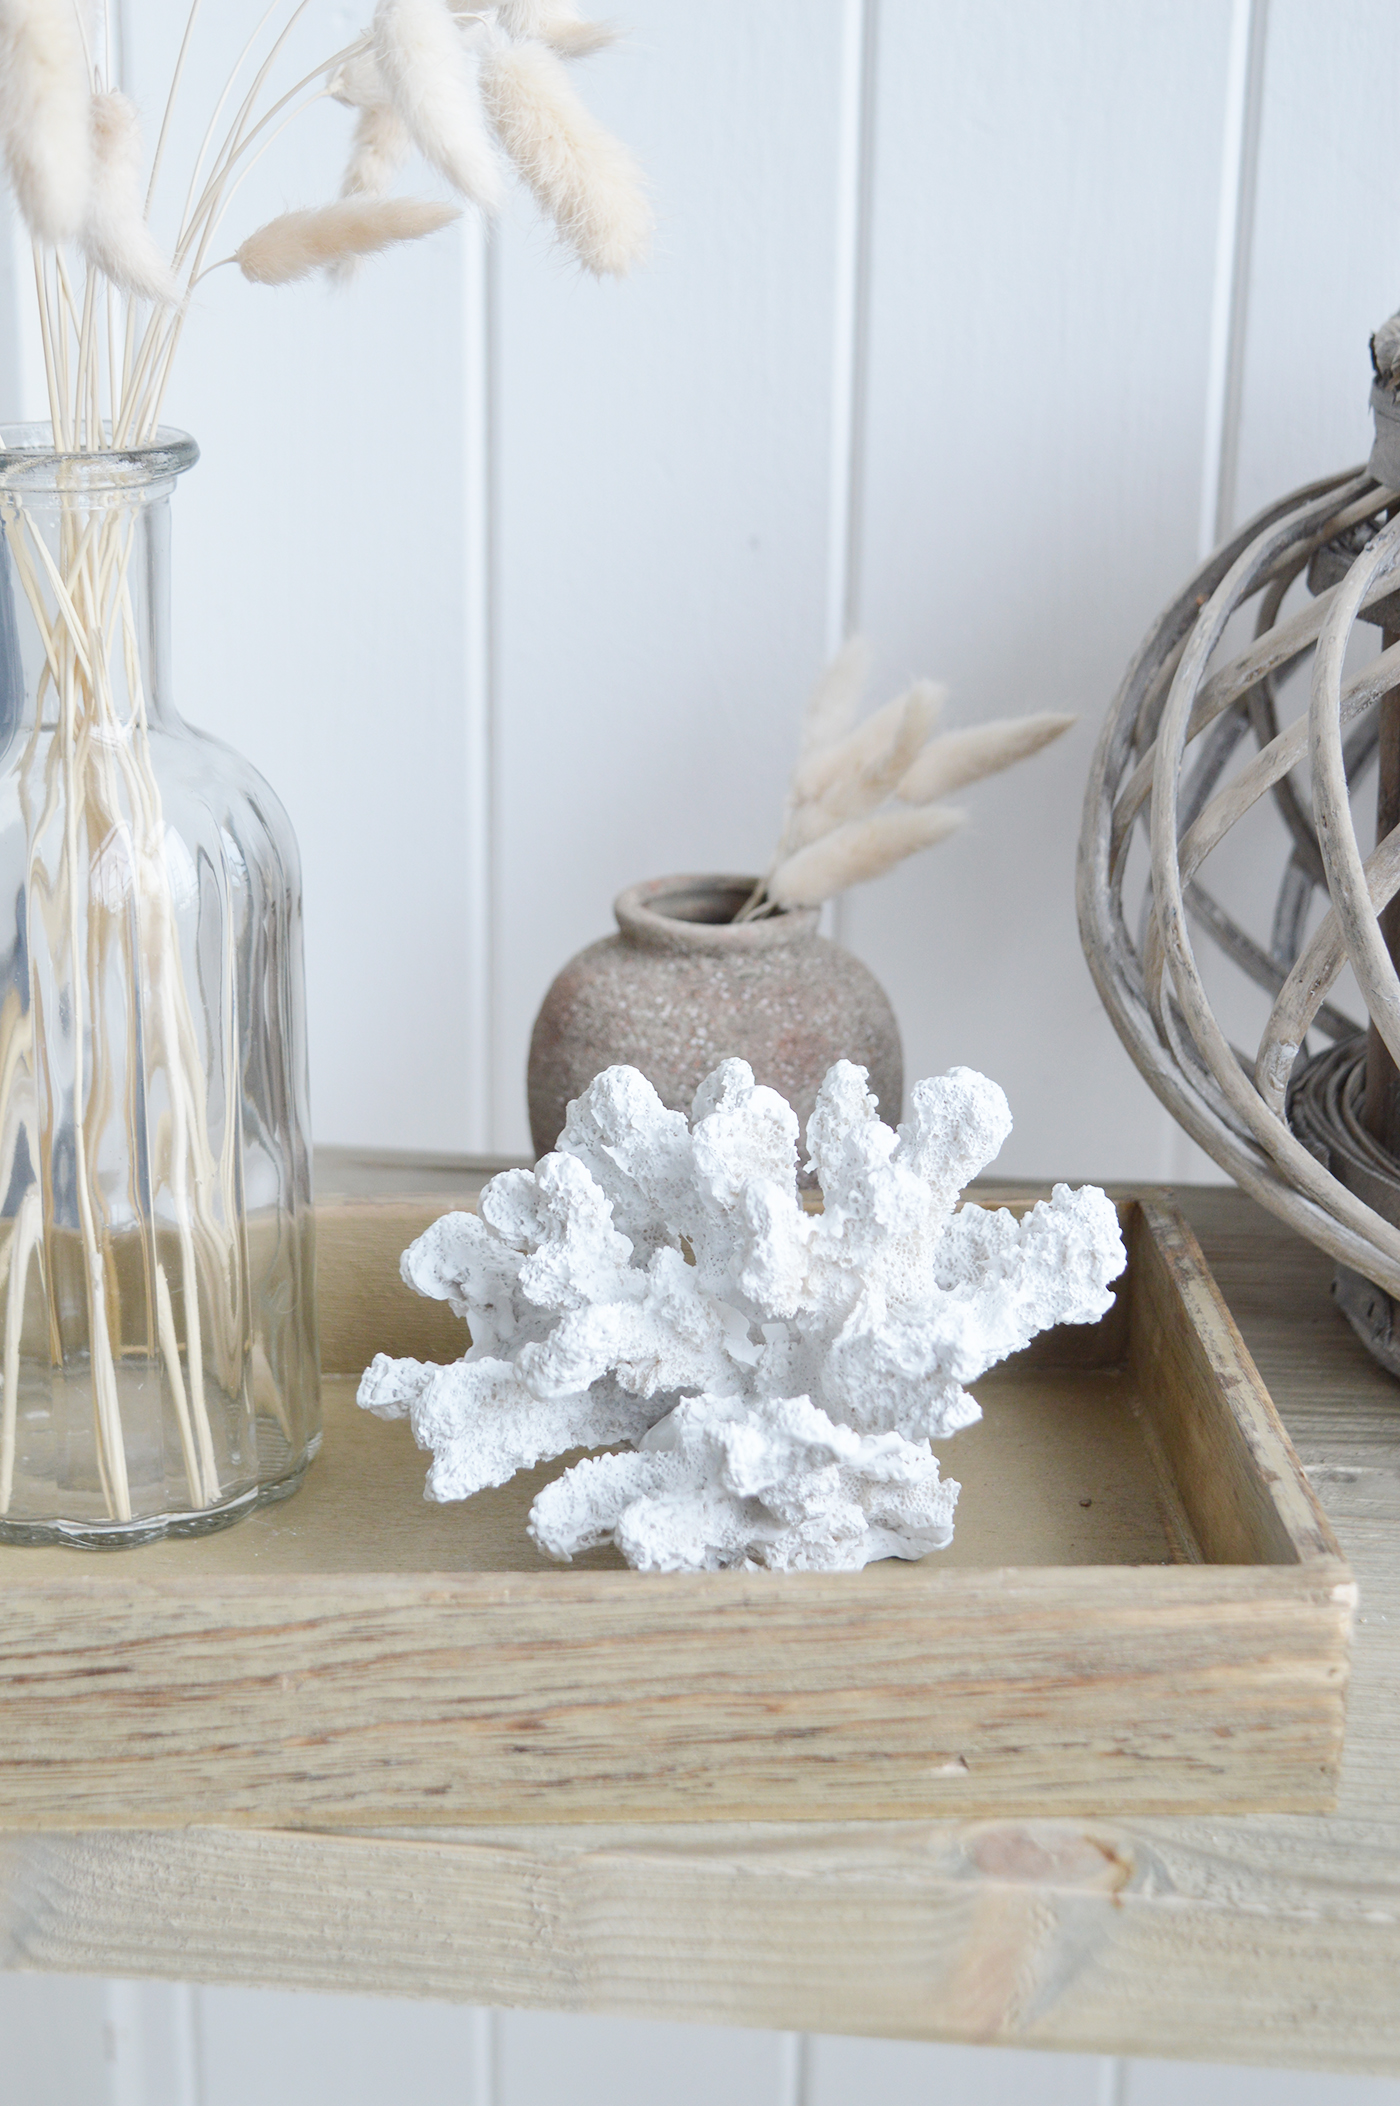 Decorative Artificial White Coral - Coffee Table Decor Elegant Coastal New England from The White Lighthouse Home. White Furniture and home decor accessories for the home interiors. New england interiors for luxury coastal home interiors